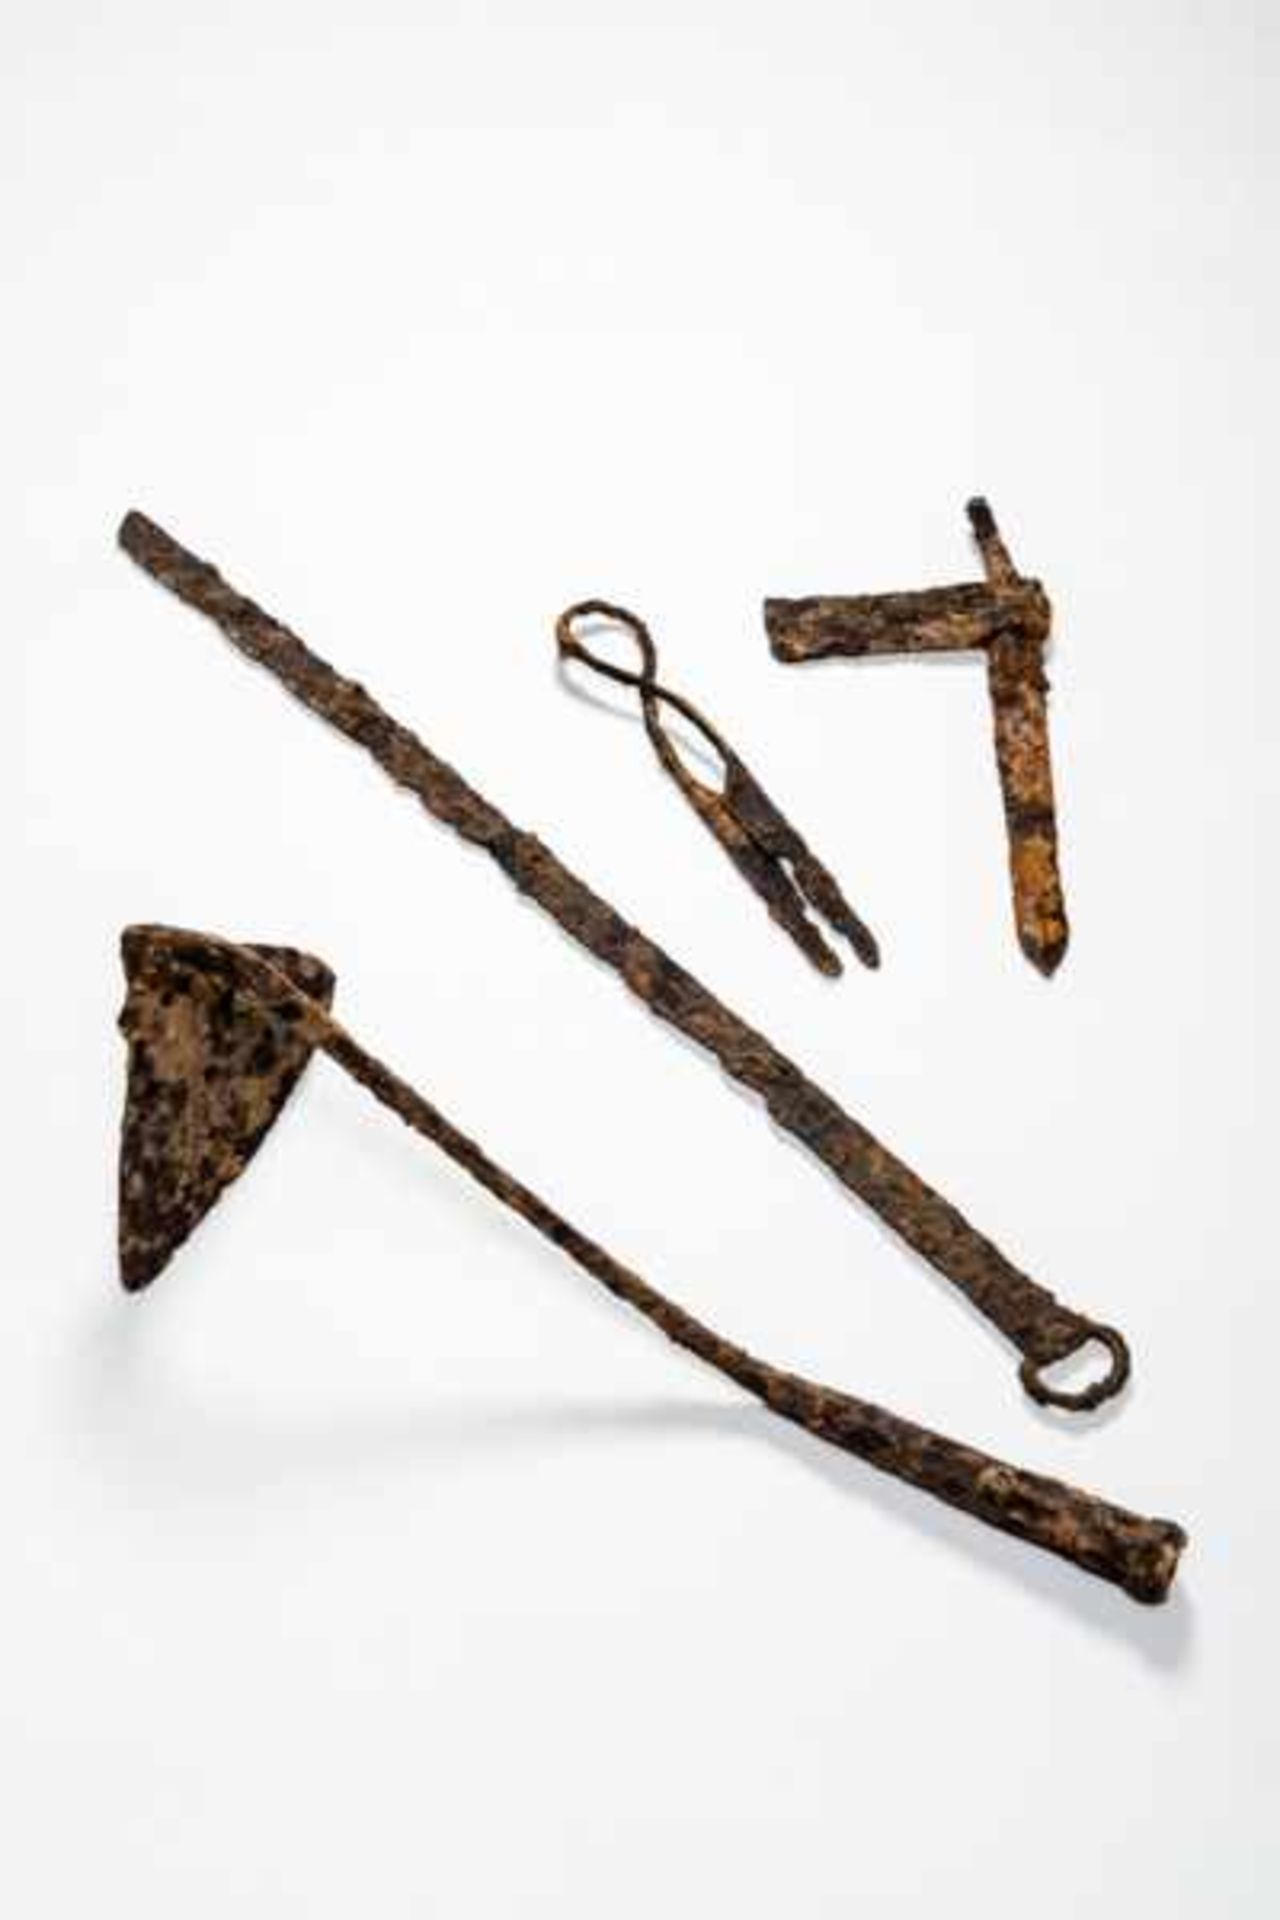 RARE COLLECTION OF IRON TOOLS Iron. China, ca. Han dynasty, 206 BCE - 220 CE,to Northern Wei dynasty - Image 2 of 3